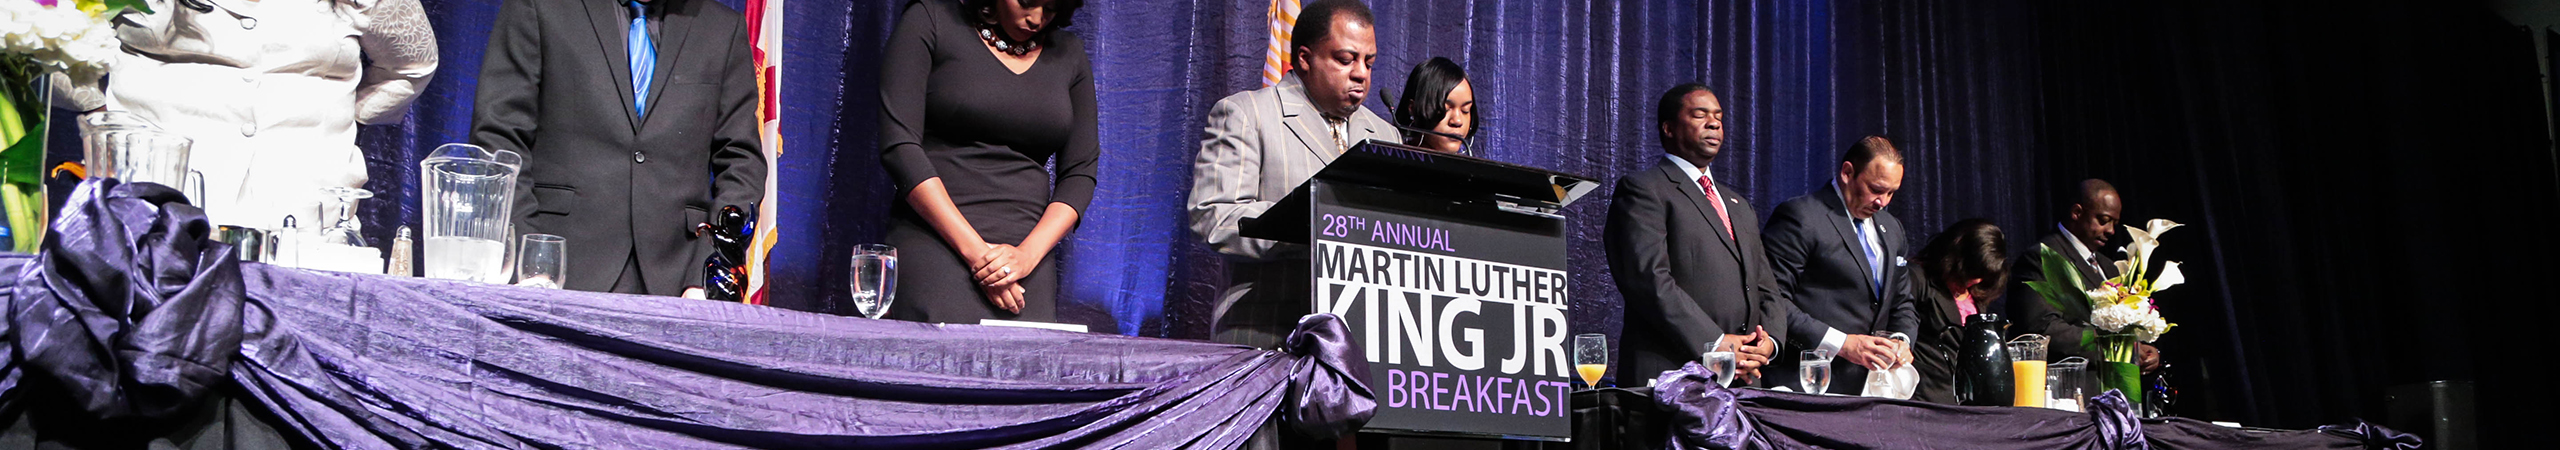 28th Annual Martin Luther King Jr. Breakfast 2015